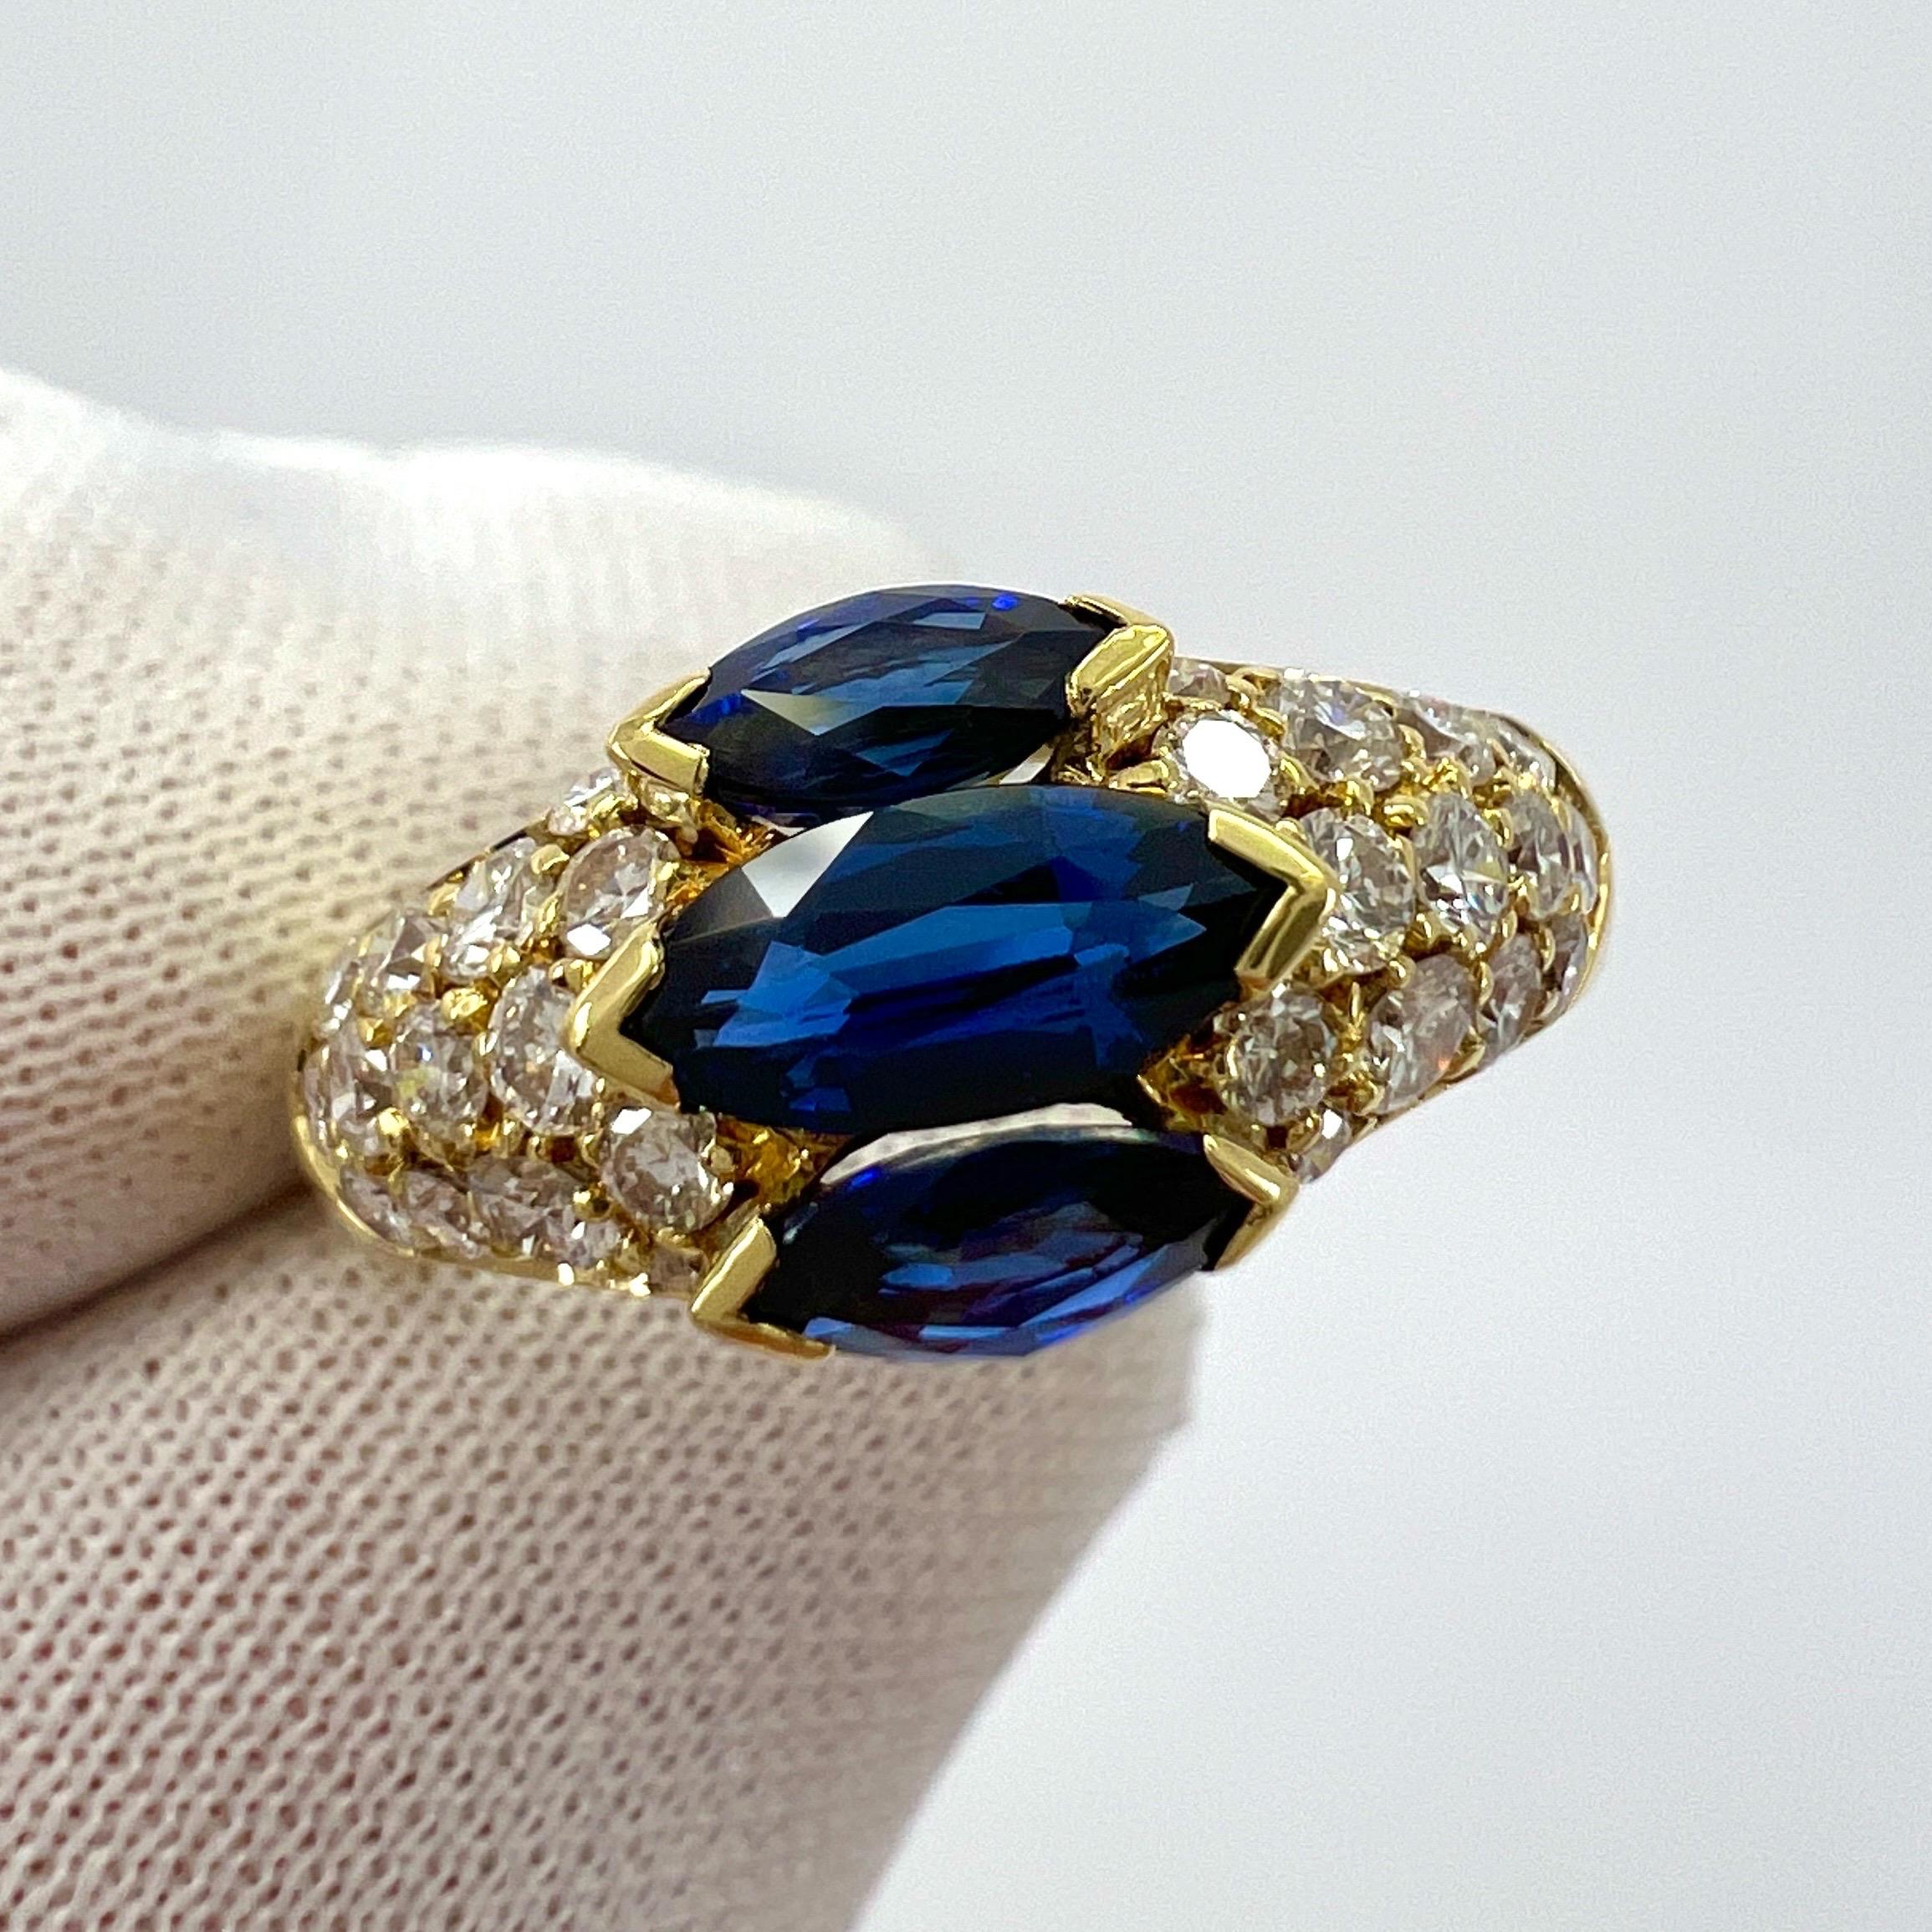 Marquise Cut Rare Vintage Van Cleef & Arpels Marquise Blue Sapphire And Diamond Cocktail Ring For Sale